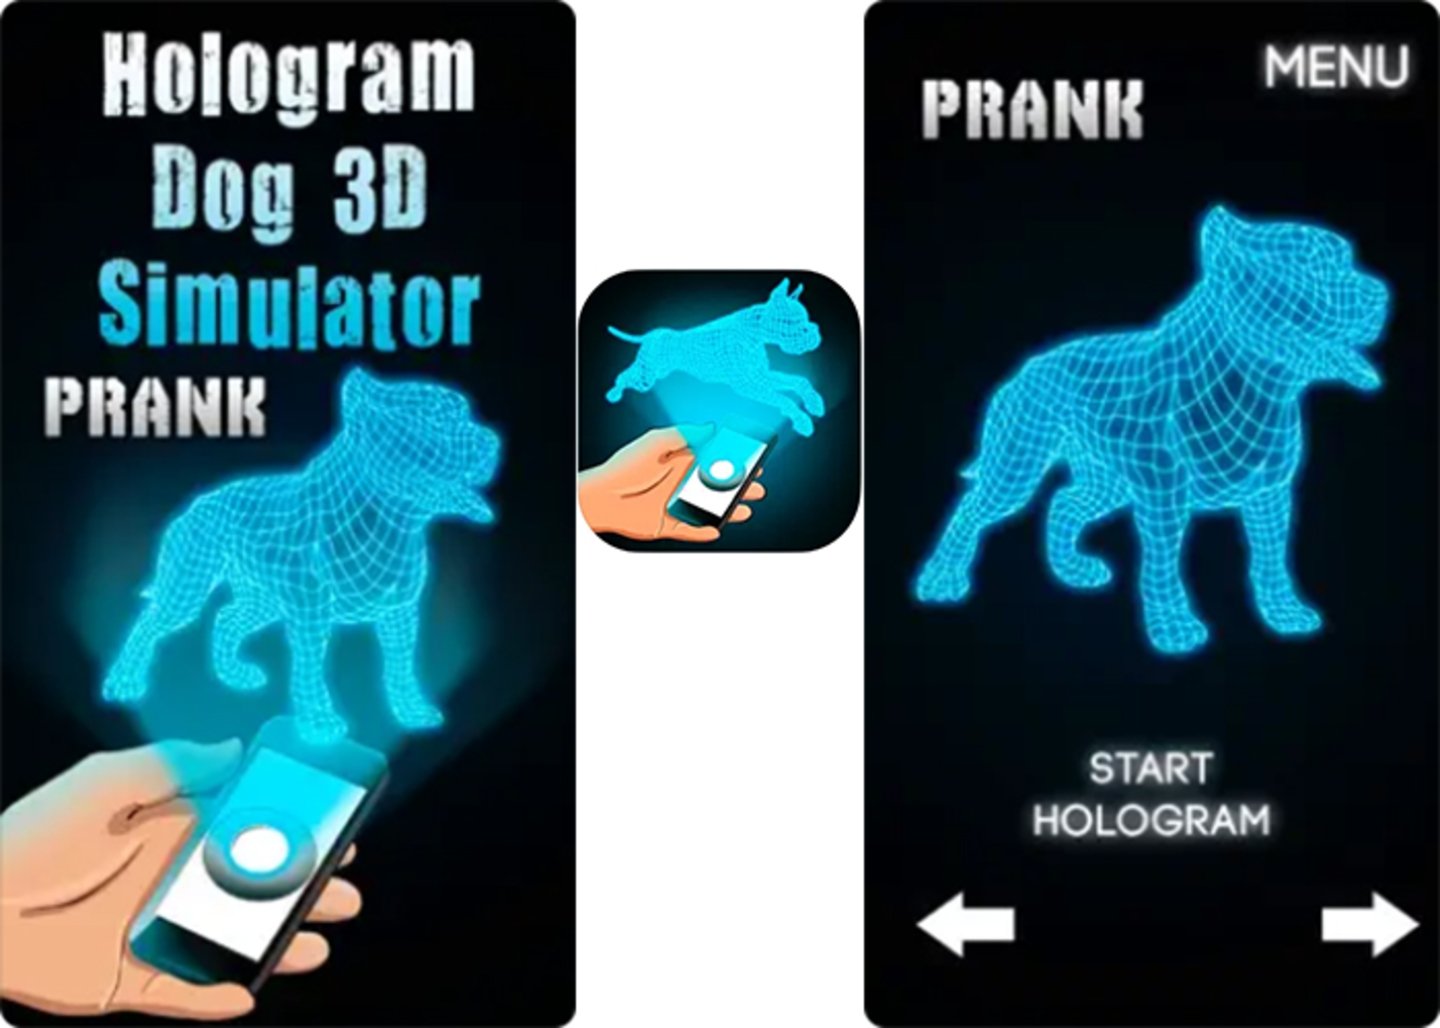 Play with a virtual dog in 3D with Hologram Dog Simulator